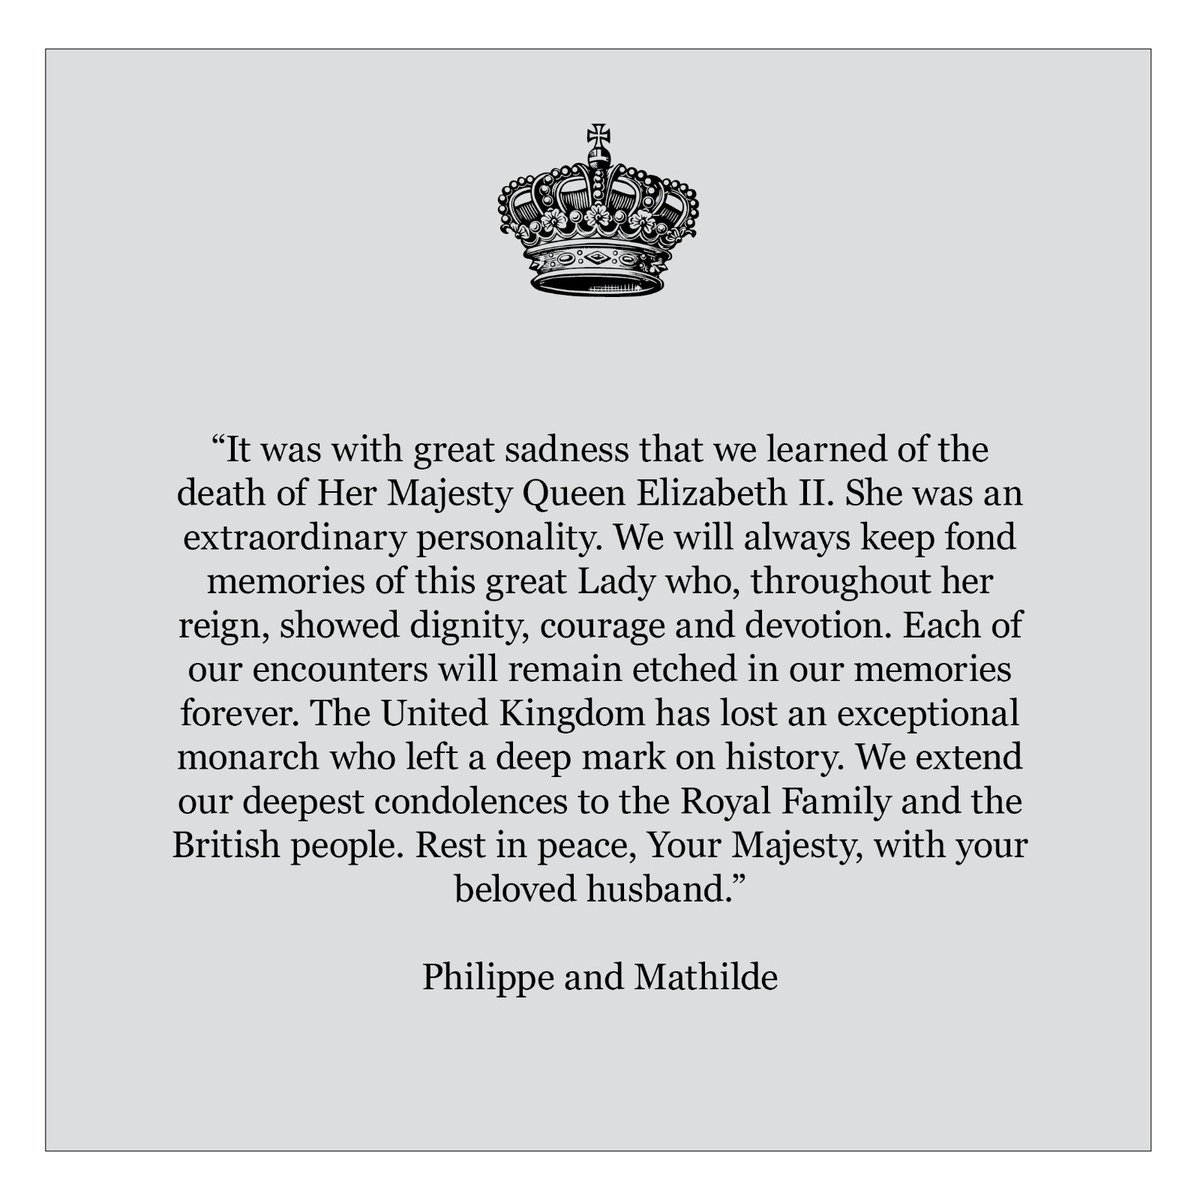 Message by King Philippe and Queen Mathilde on the passing of Queen Elizabeth II: